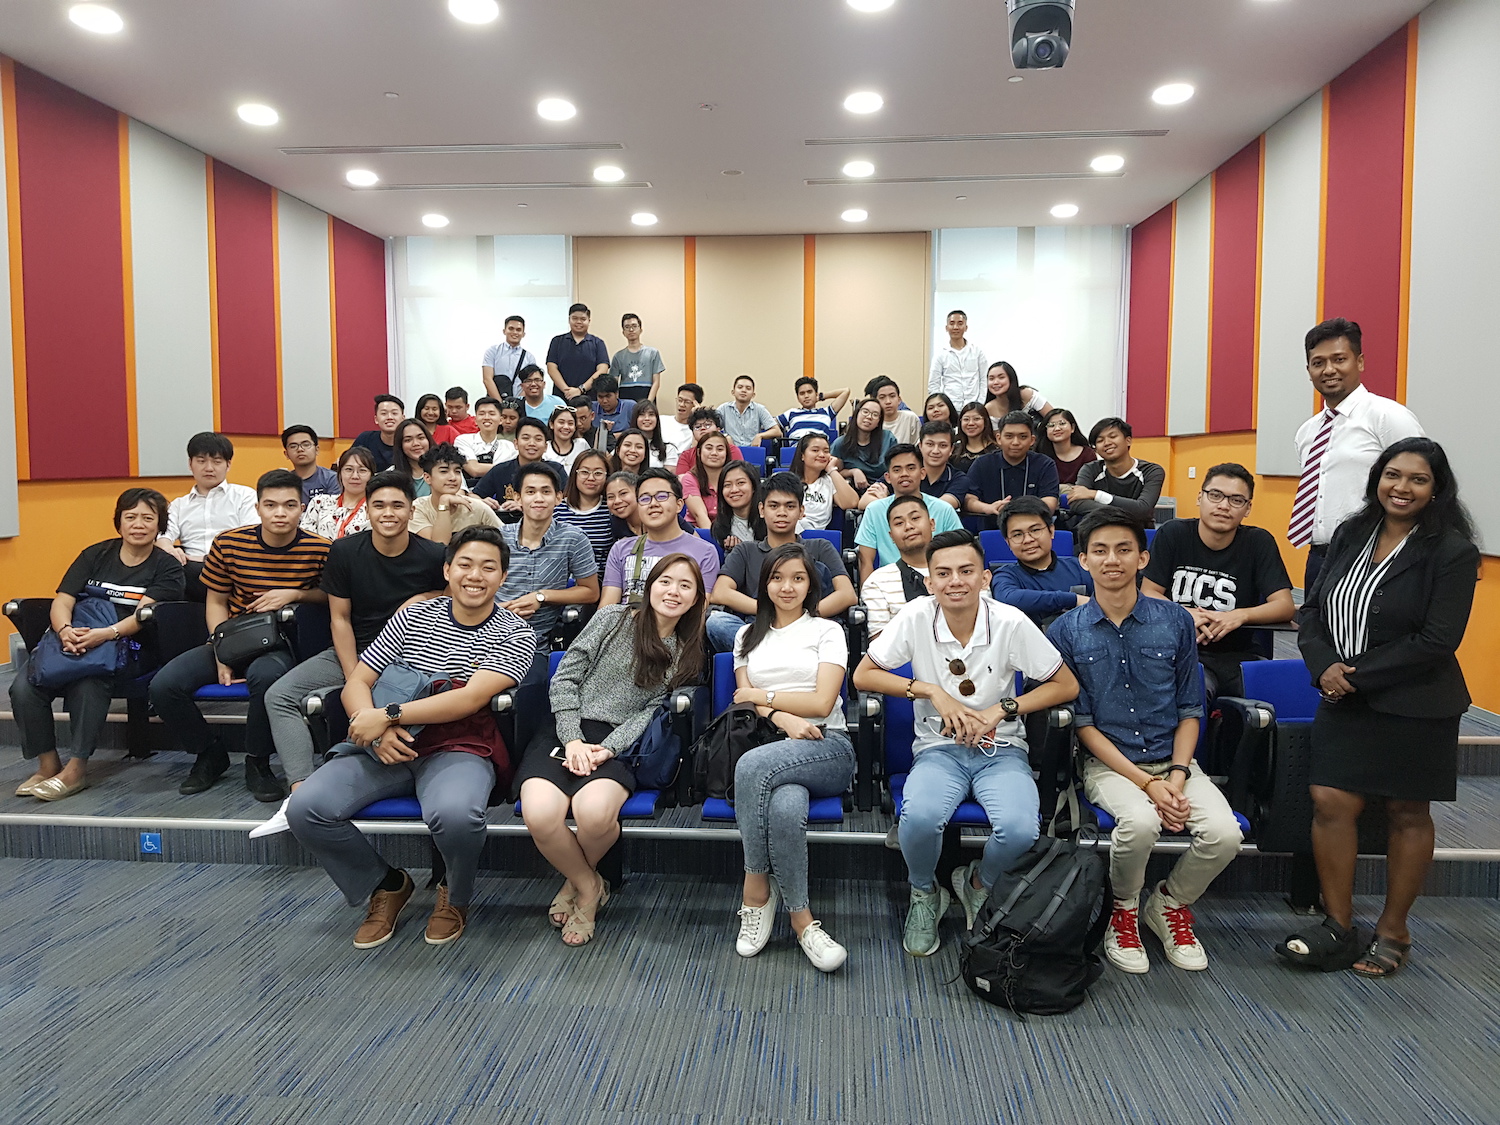 MDIS students posing for a picture in the lecture theatre.